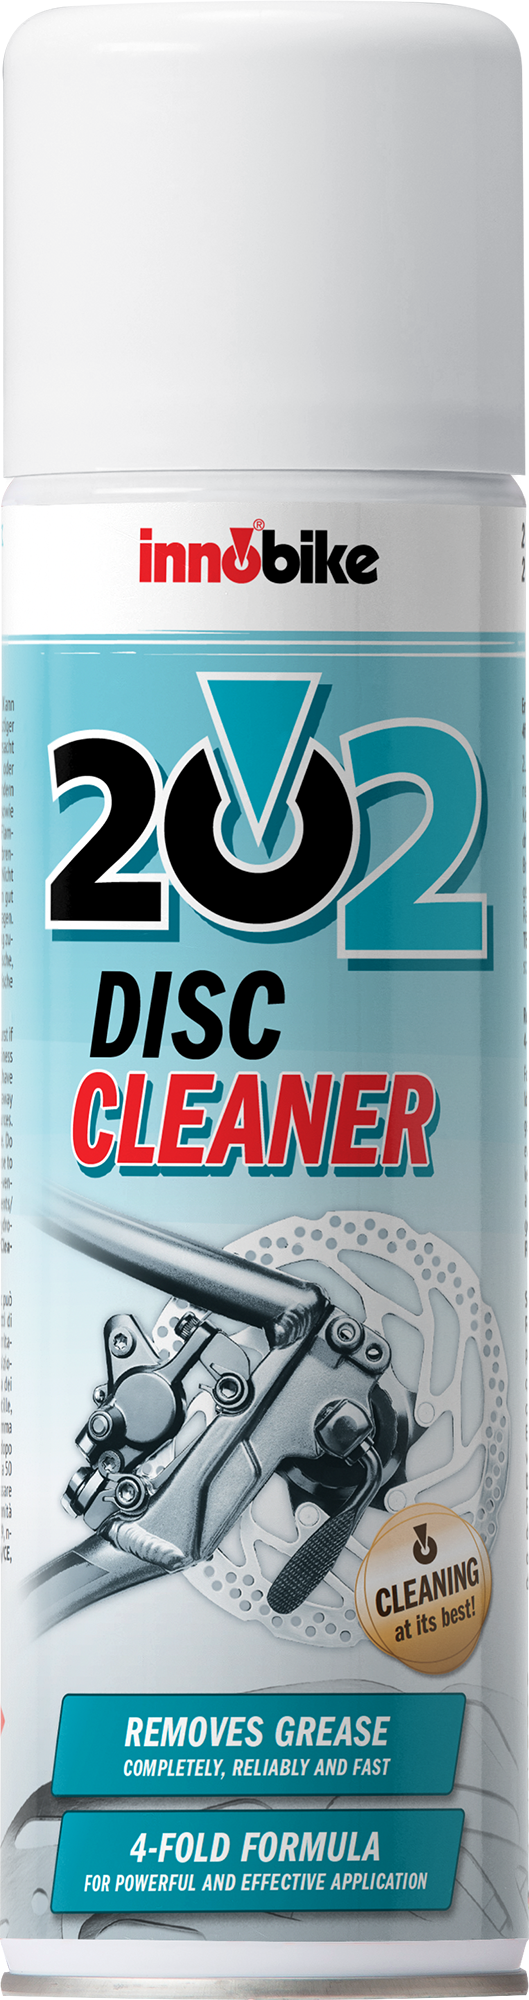 202 DISC CLEANER